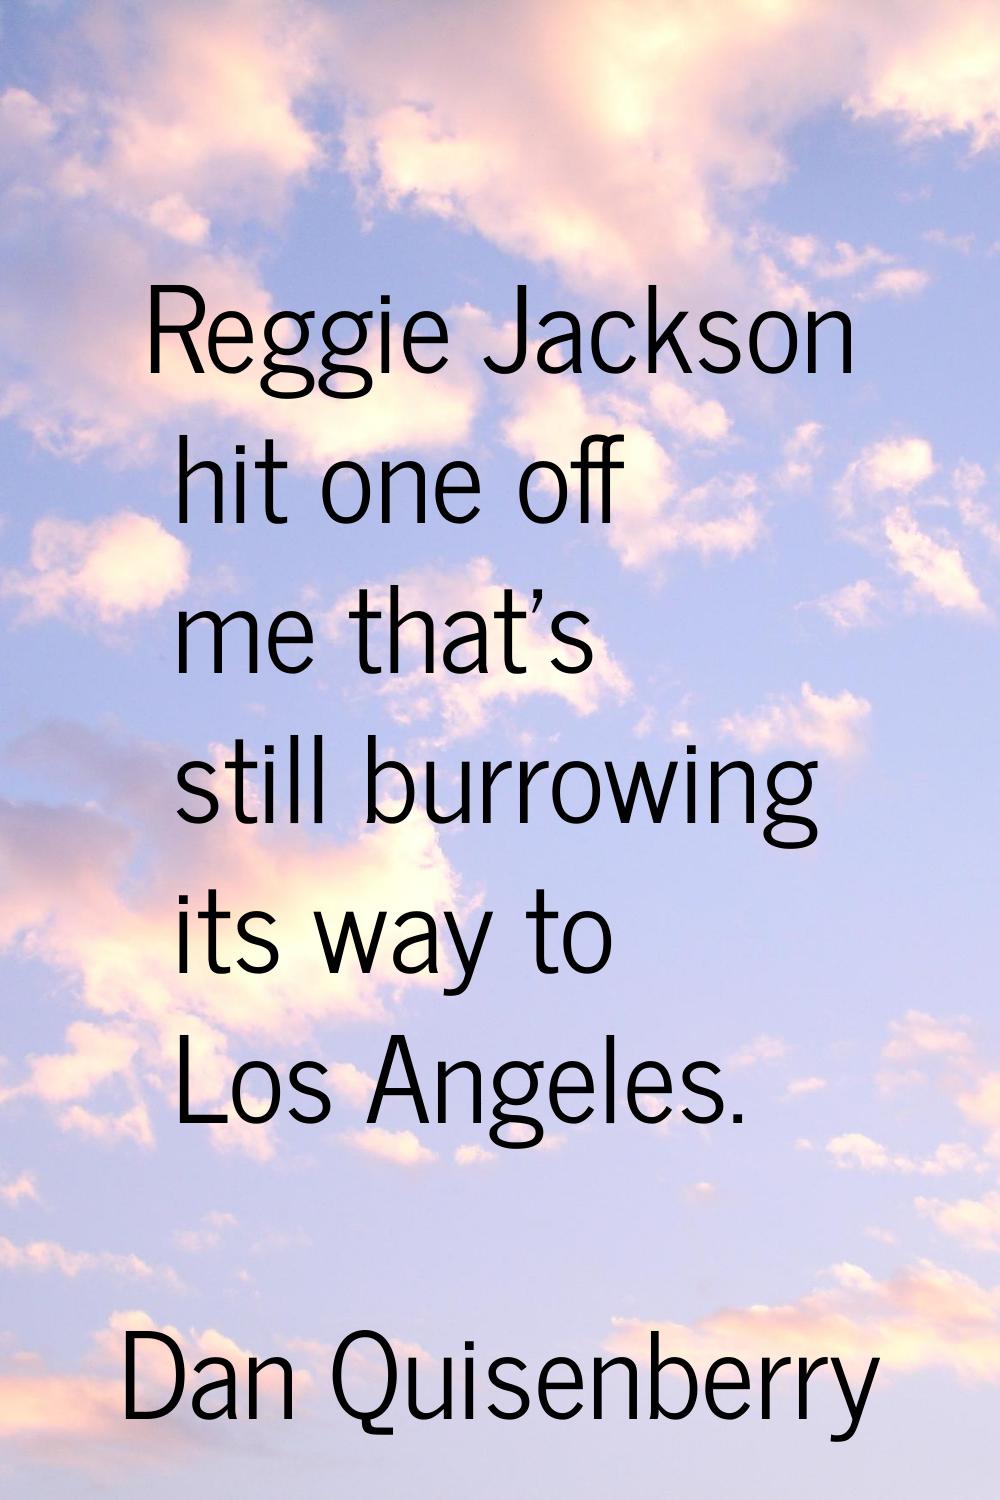 Reggie Jackson hit one off me that's still burrowing its way to Los Angeles.